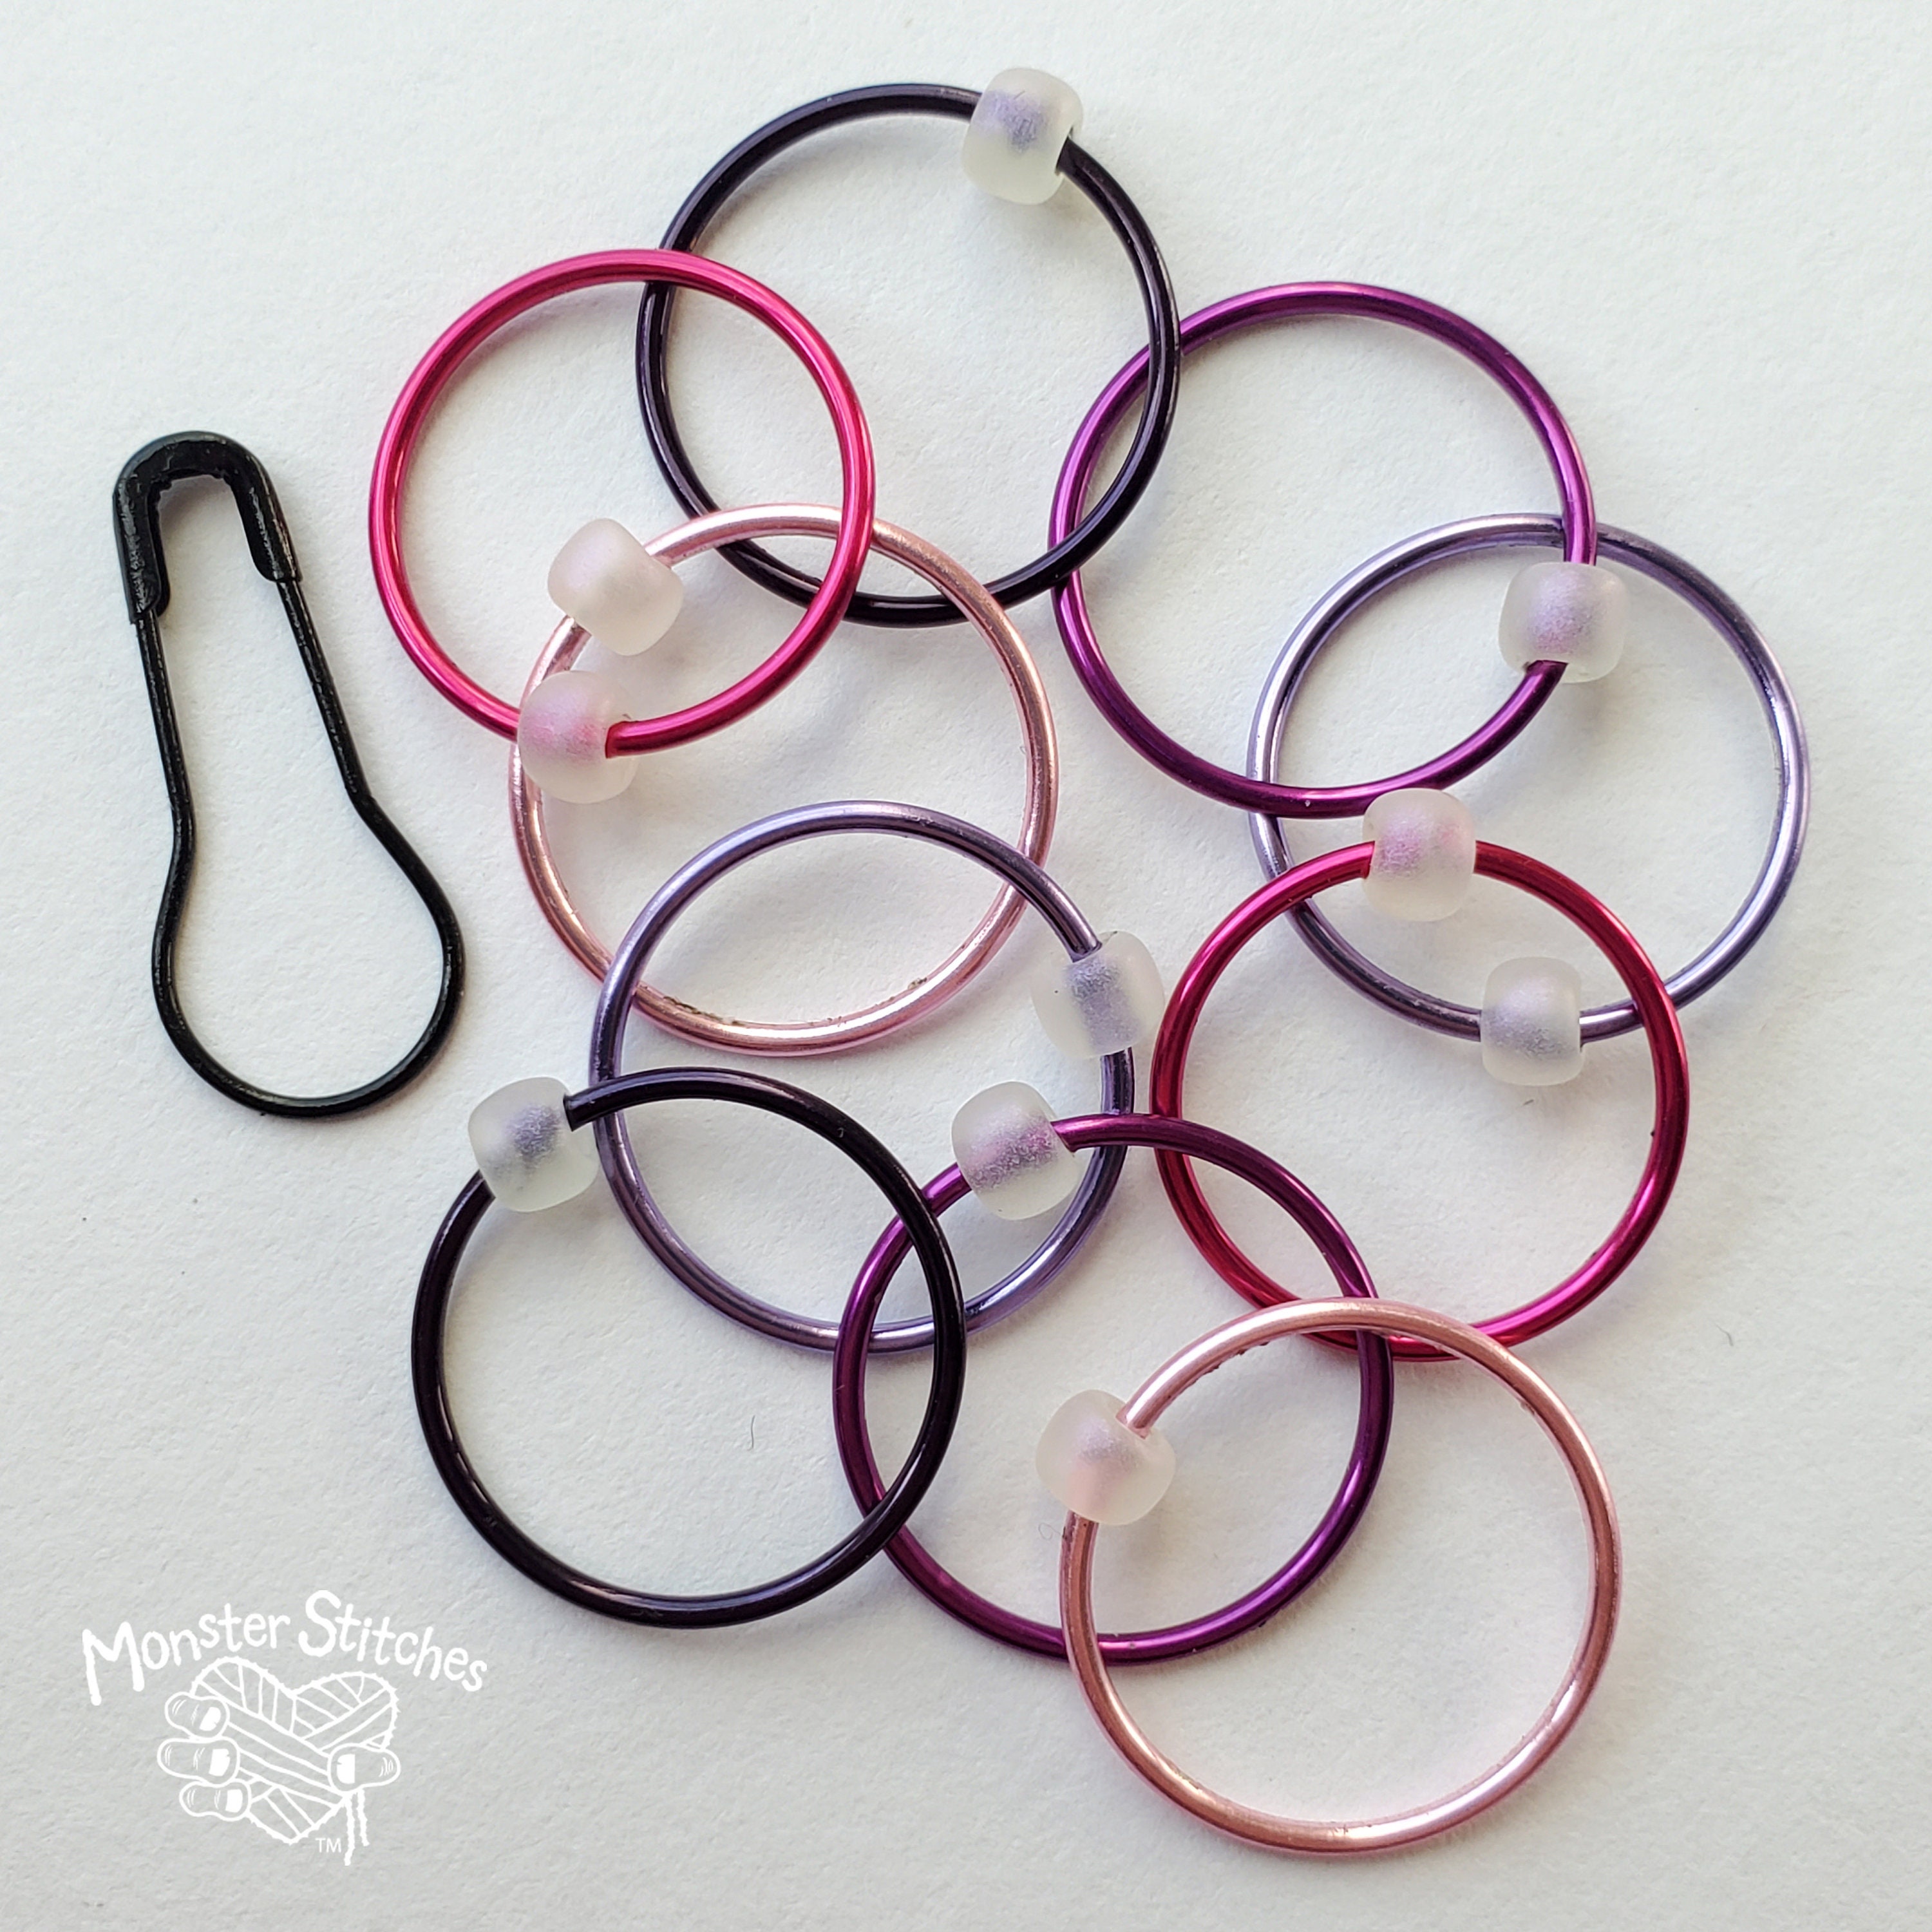 Makers' Set of 15 Stitch Markers